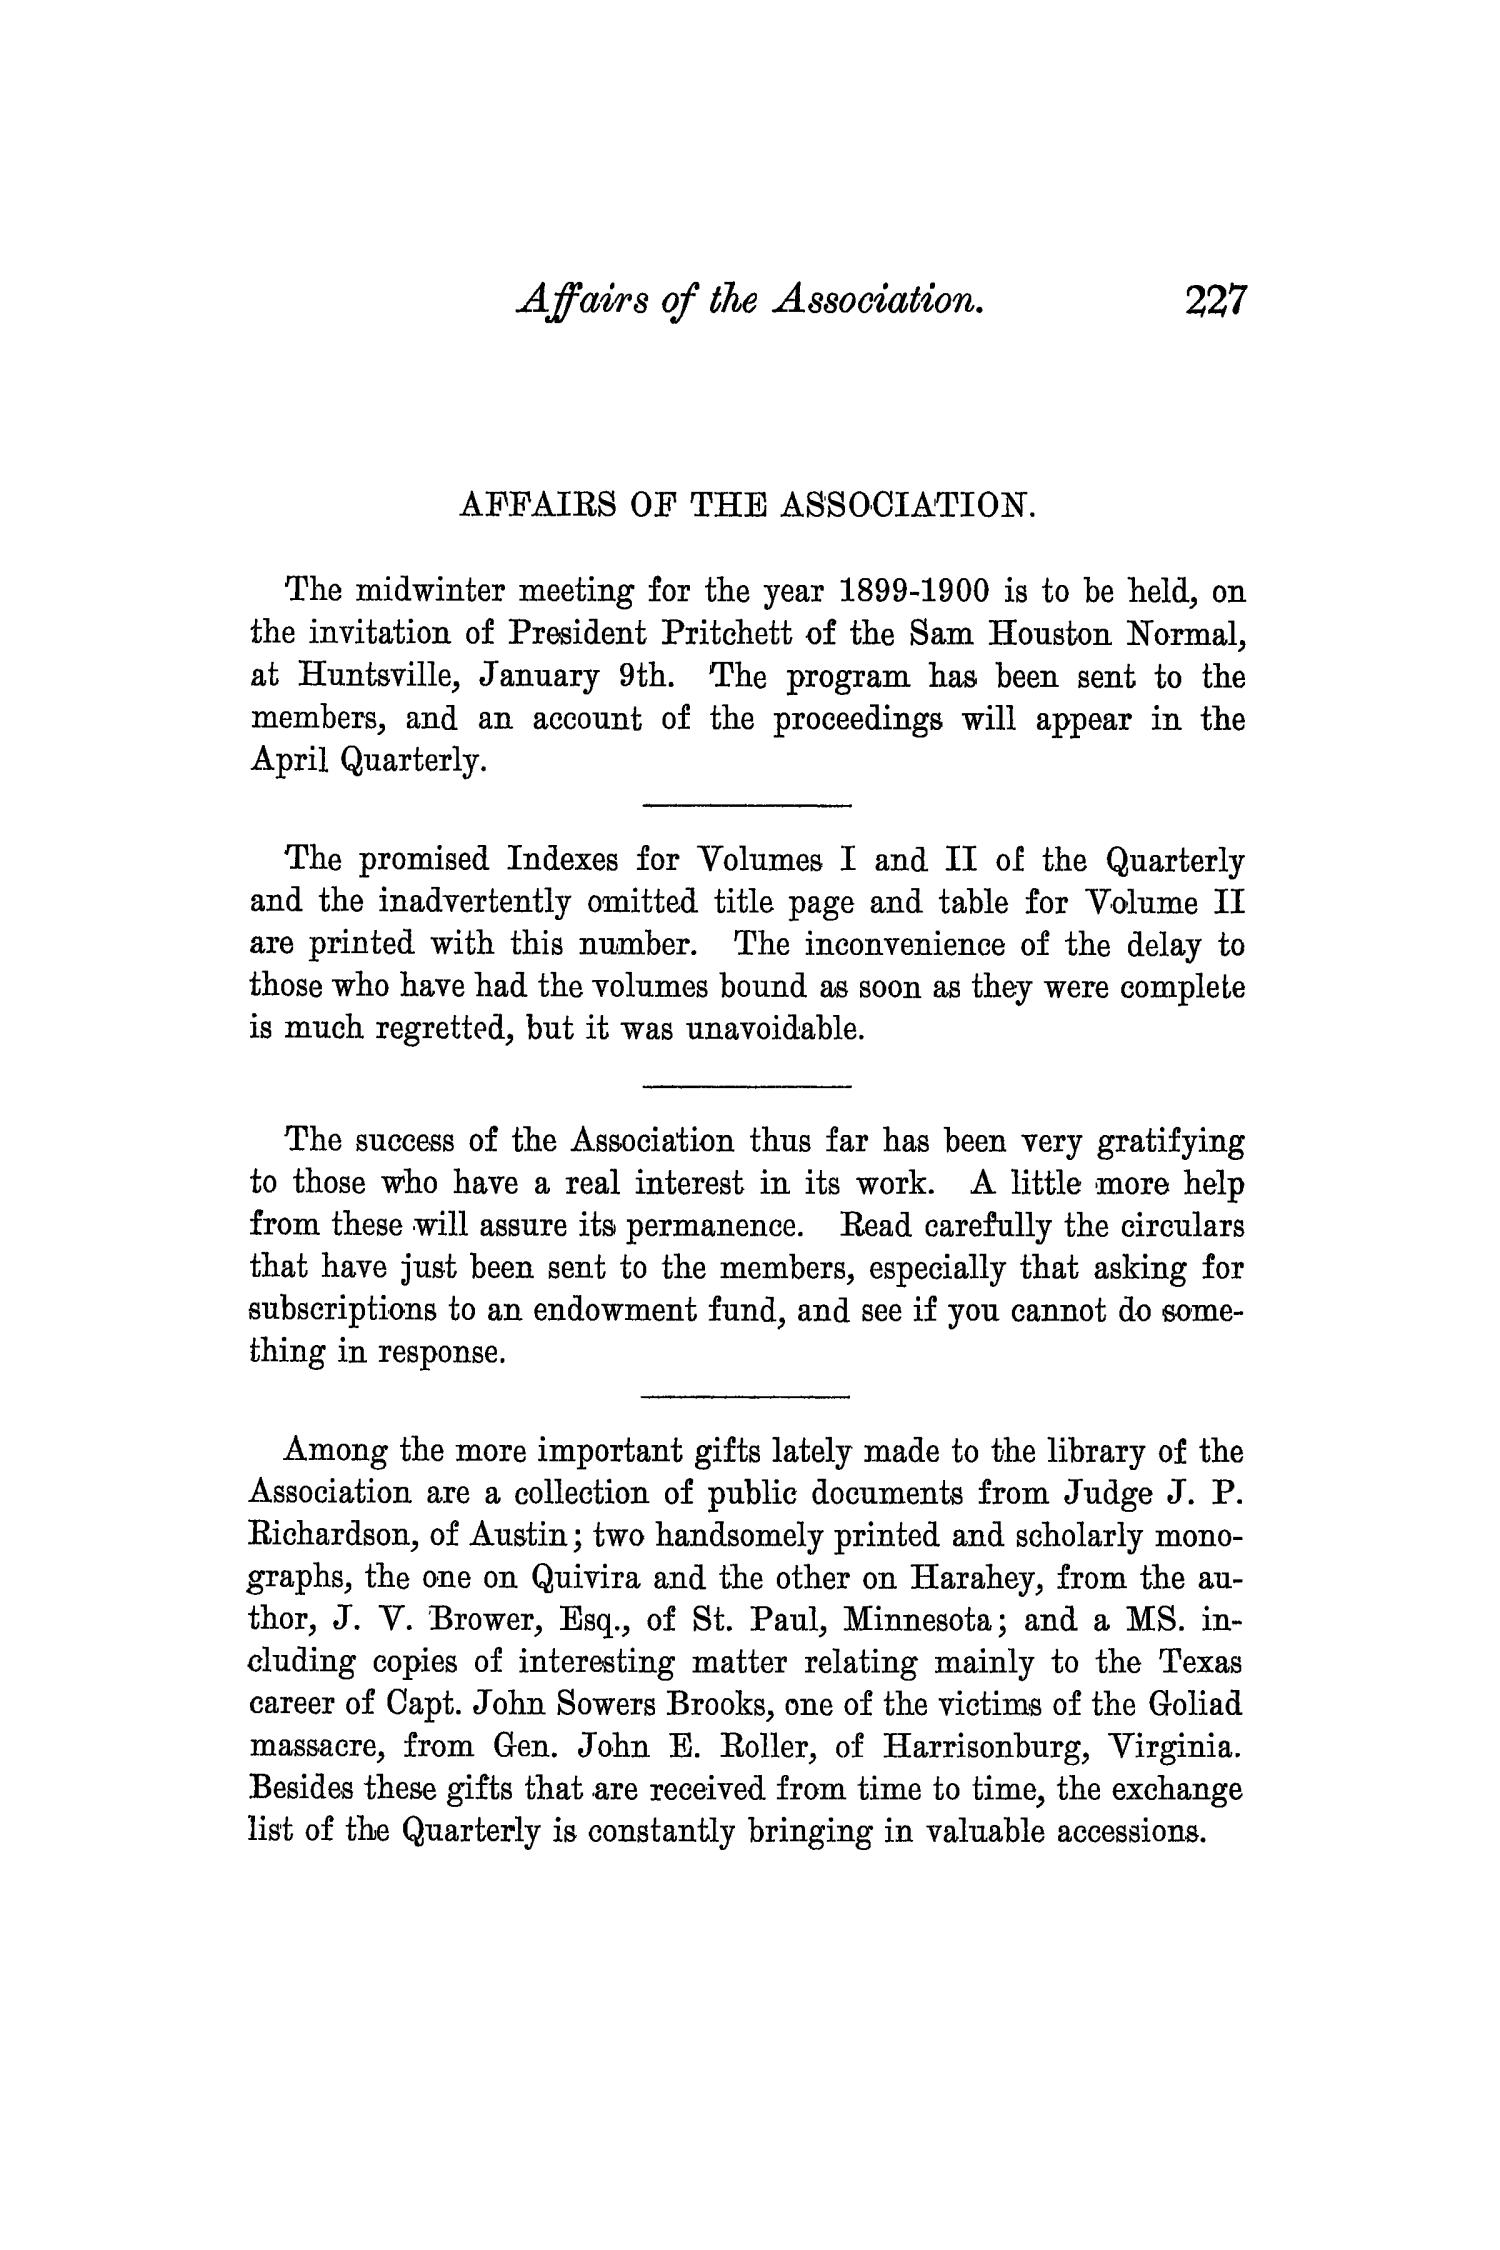 The Quarterly of the Texas State Historical Association, Volume 3, July 1899 - April, 1900
                                                
                                                    227
                                                